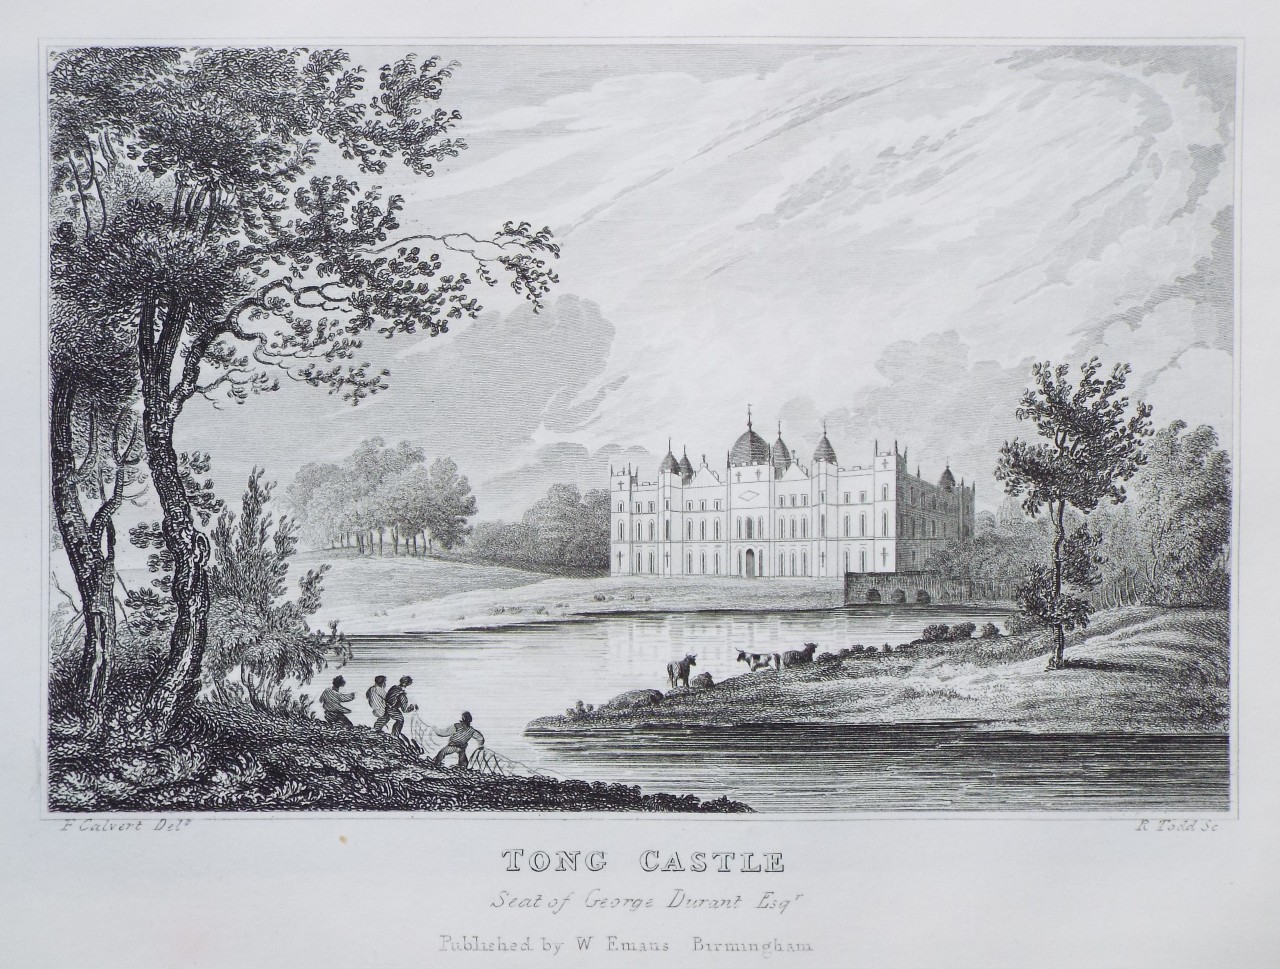 Print - Tong Castle Seat of George Durant Esqr. - Todd